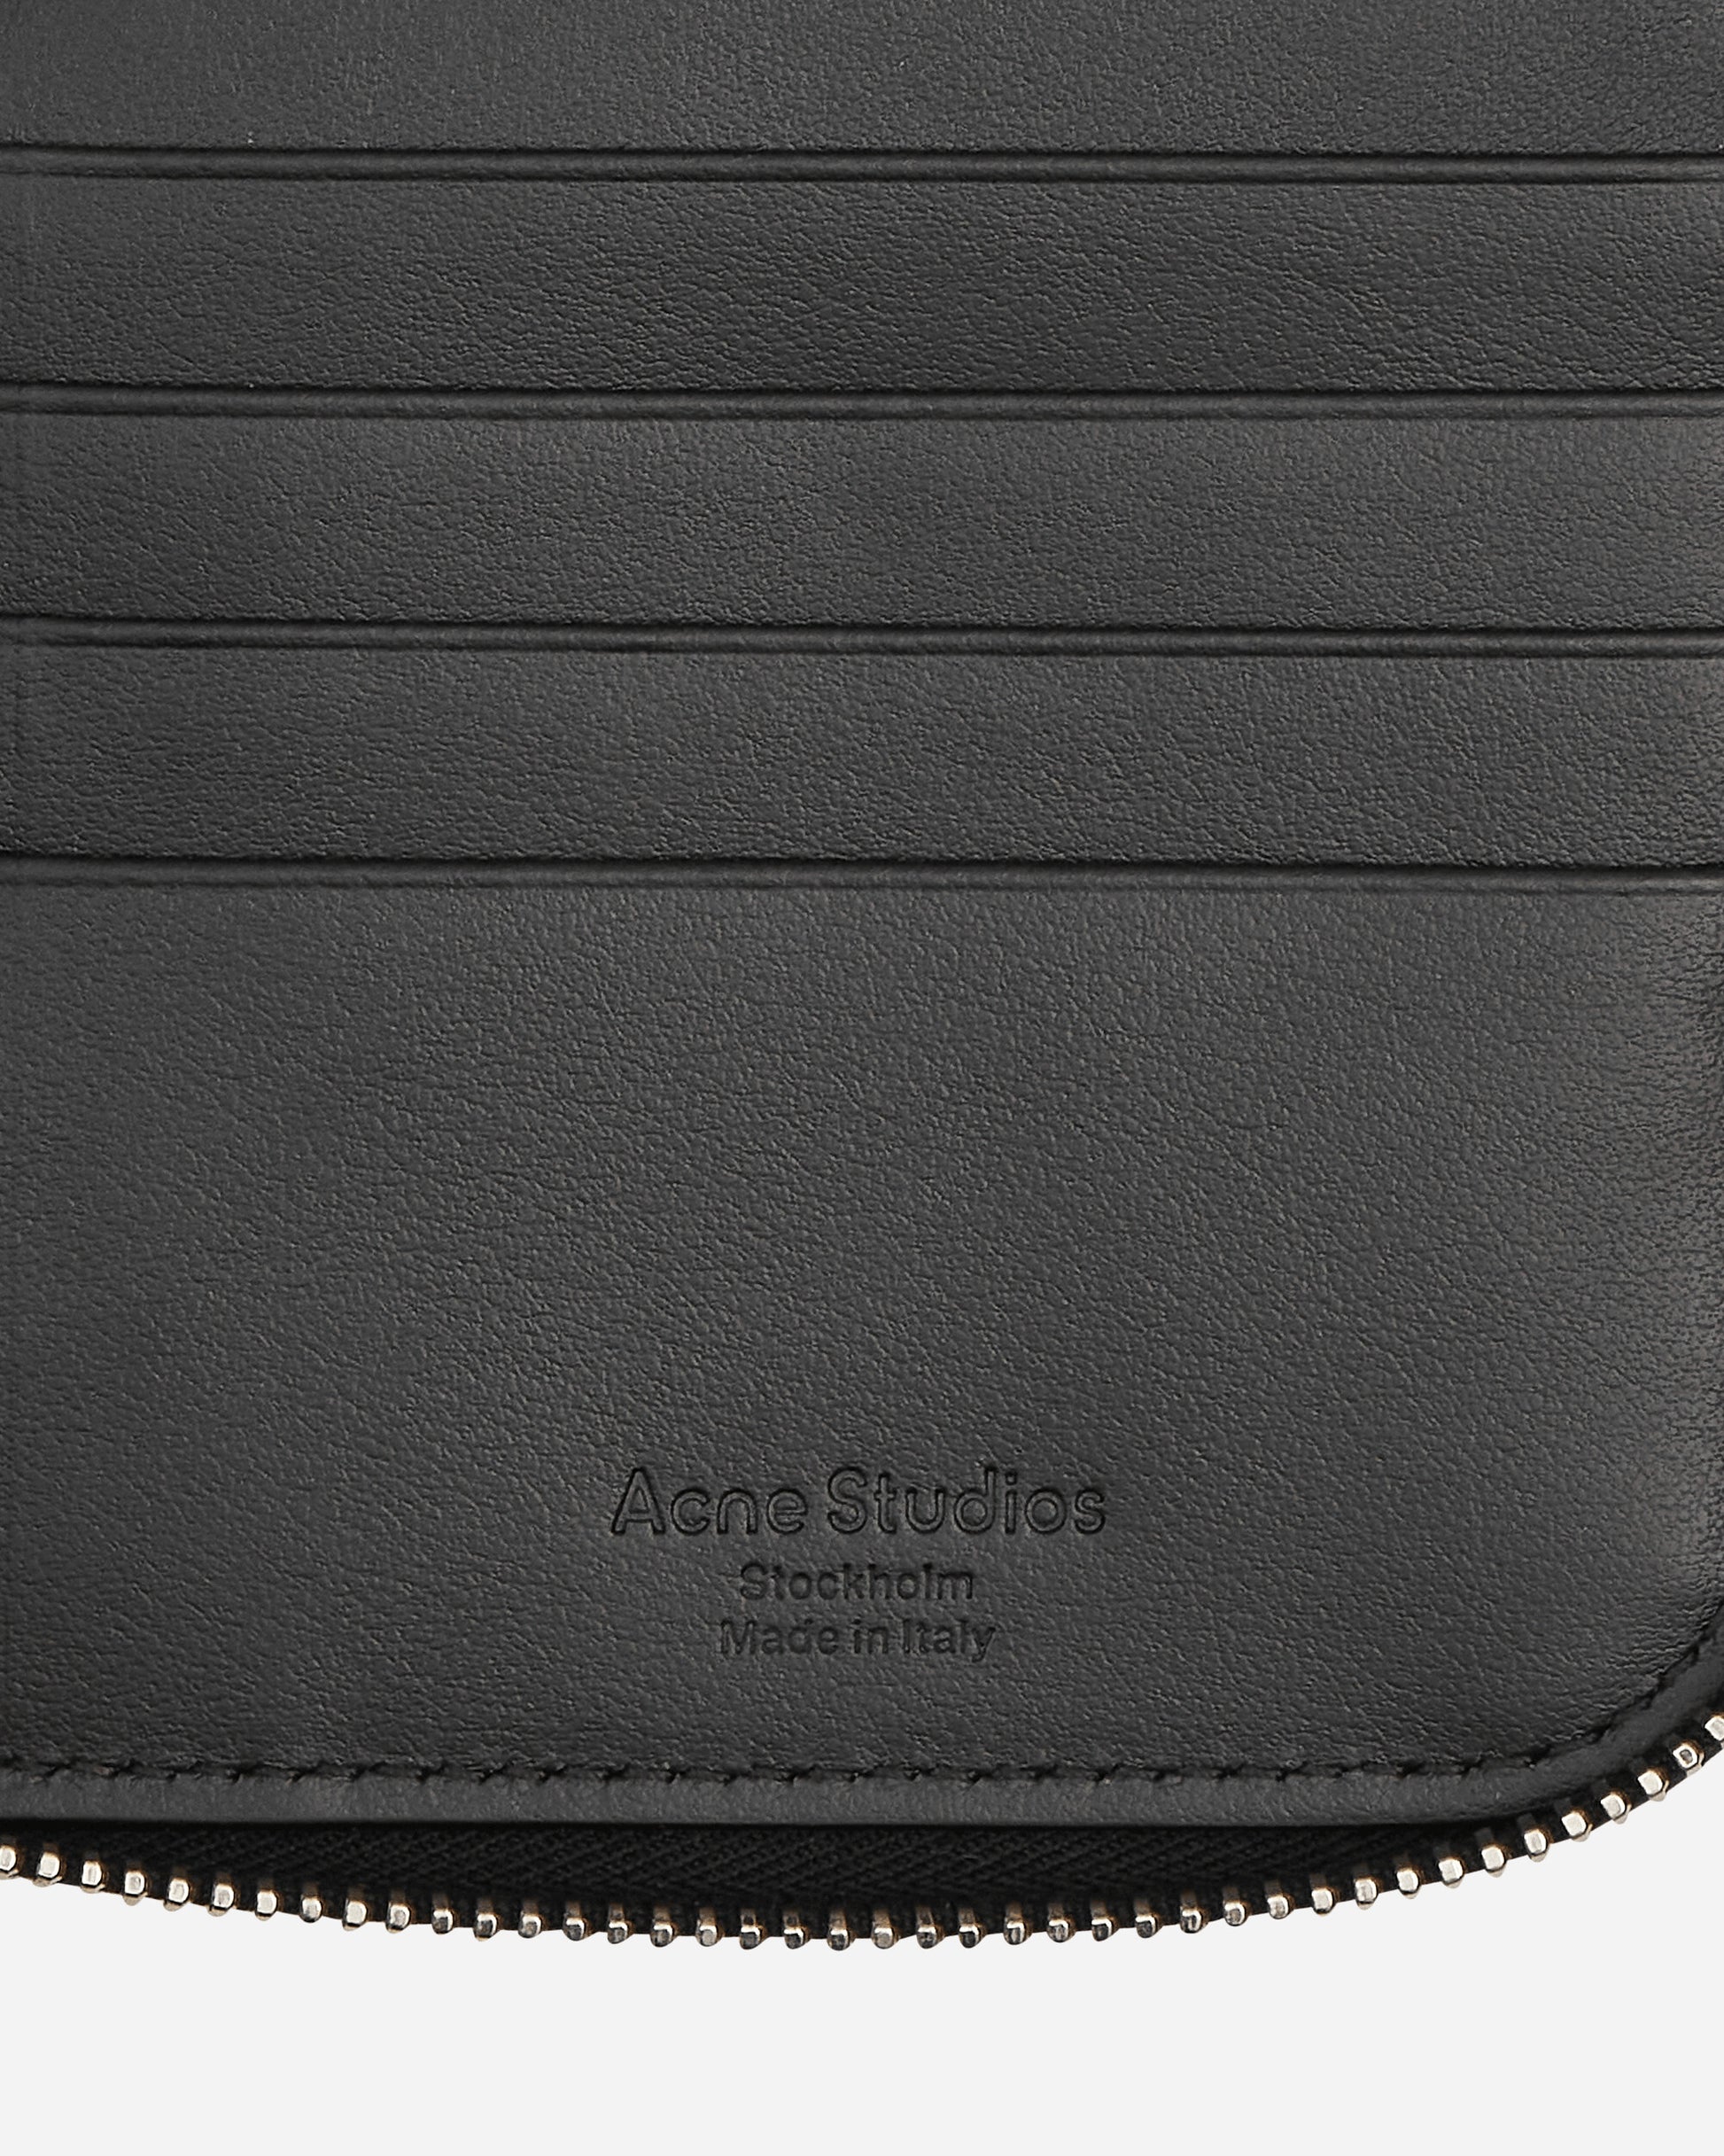 Acne Studios Fn-Ux-Slgs000115 Black Wallets and Cardholders Wallets CG0106- 900